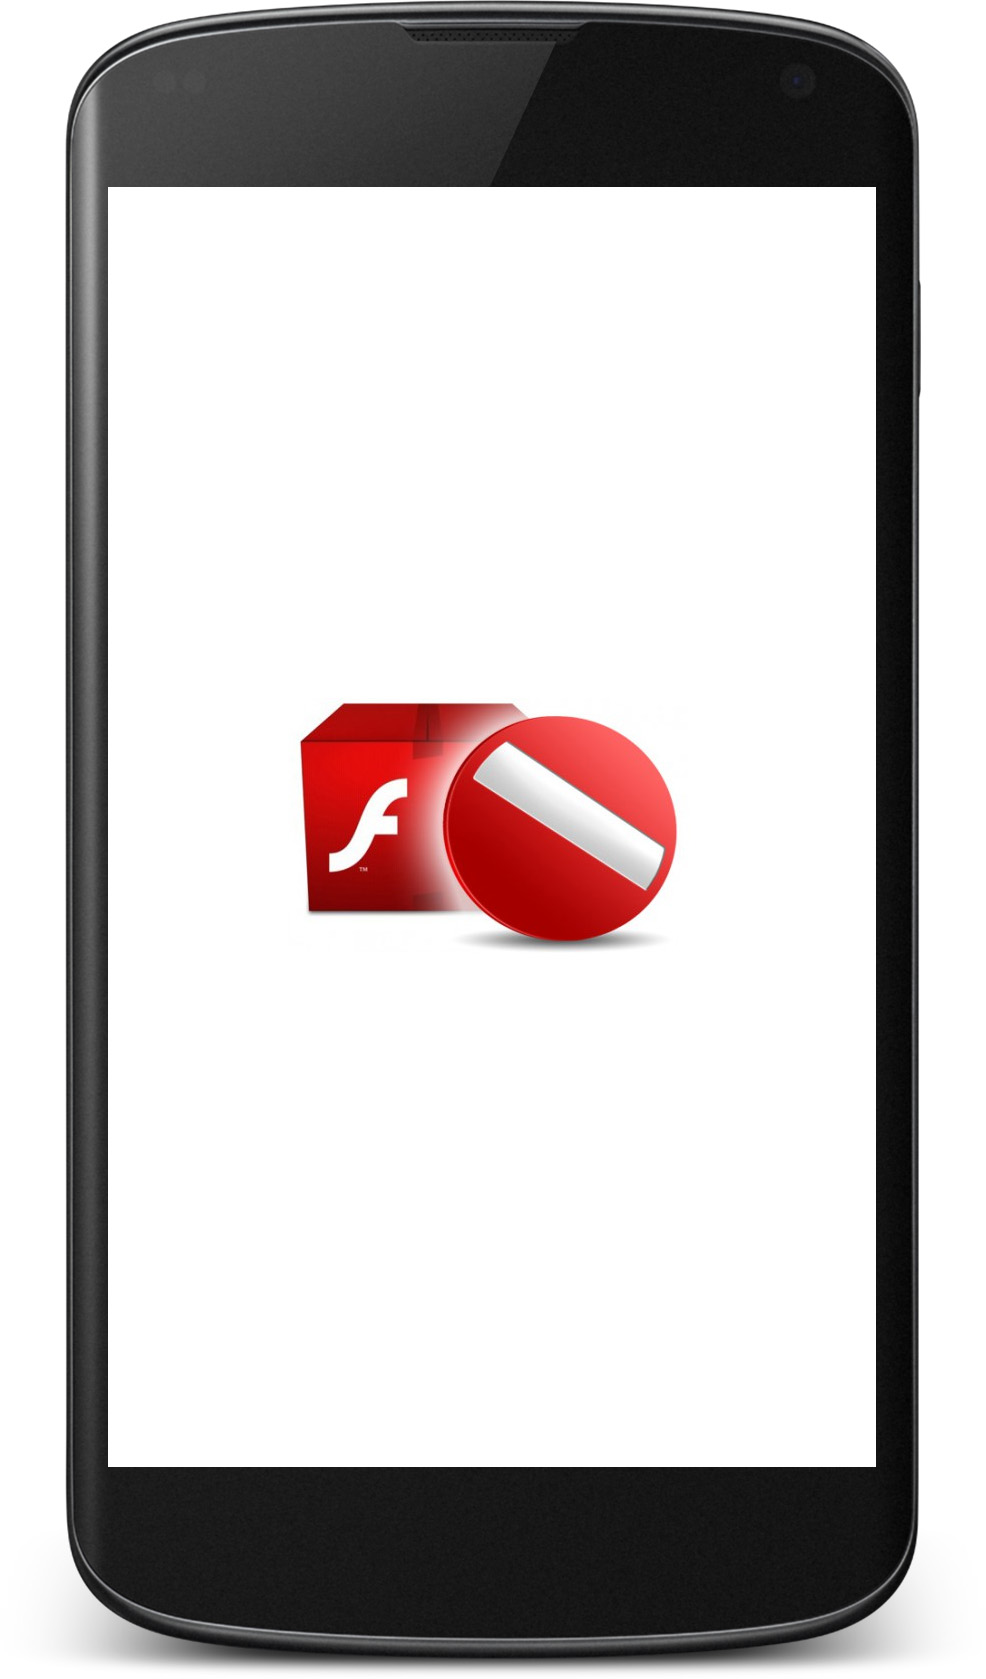 adobe flash player free download and install for windows xp